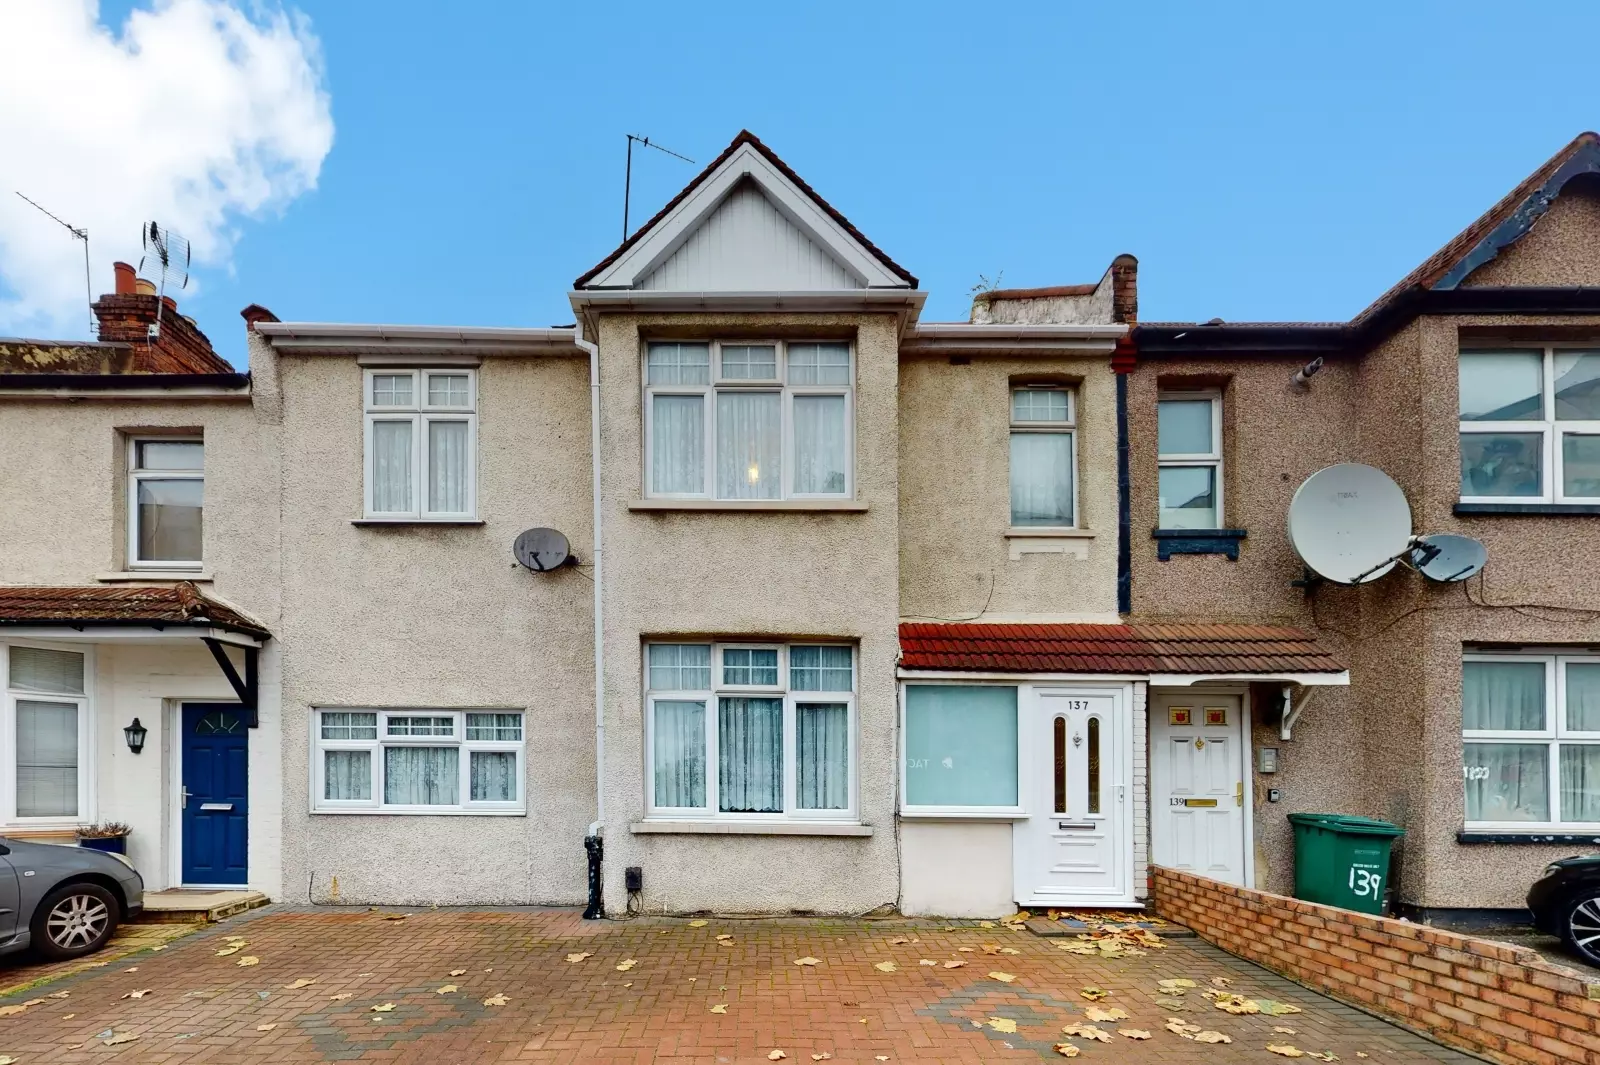 6 Bedroom Terraced House In Colindale Avenue, London